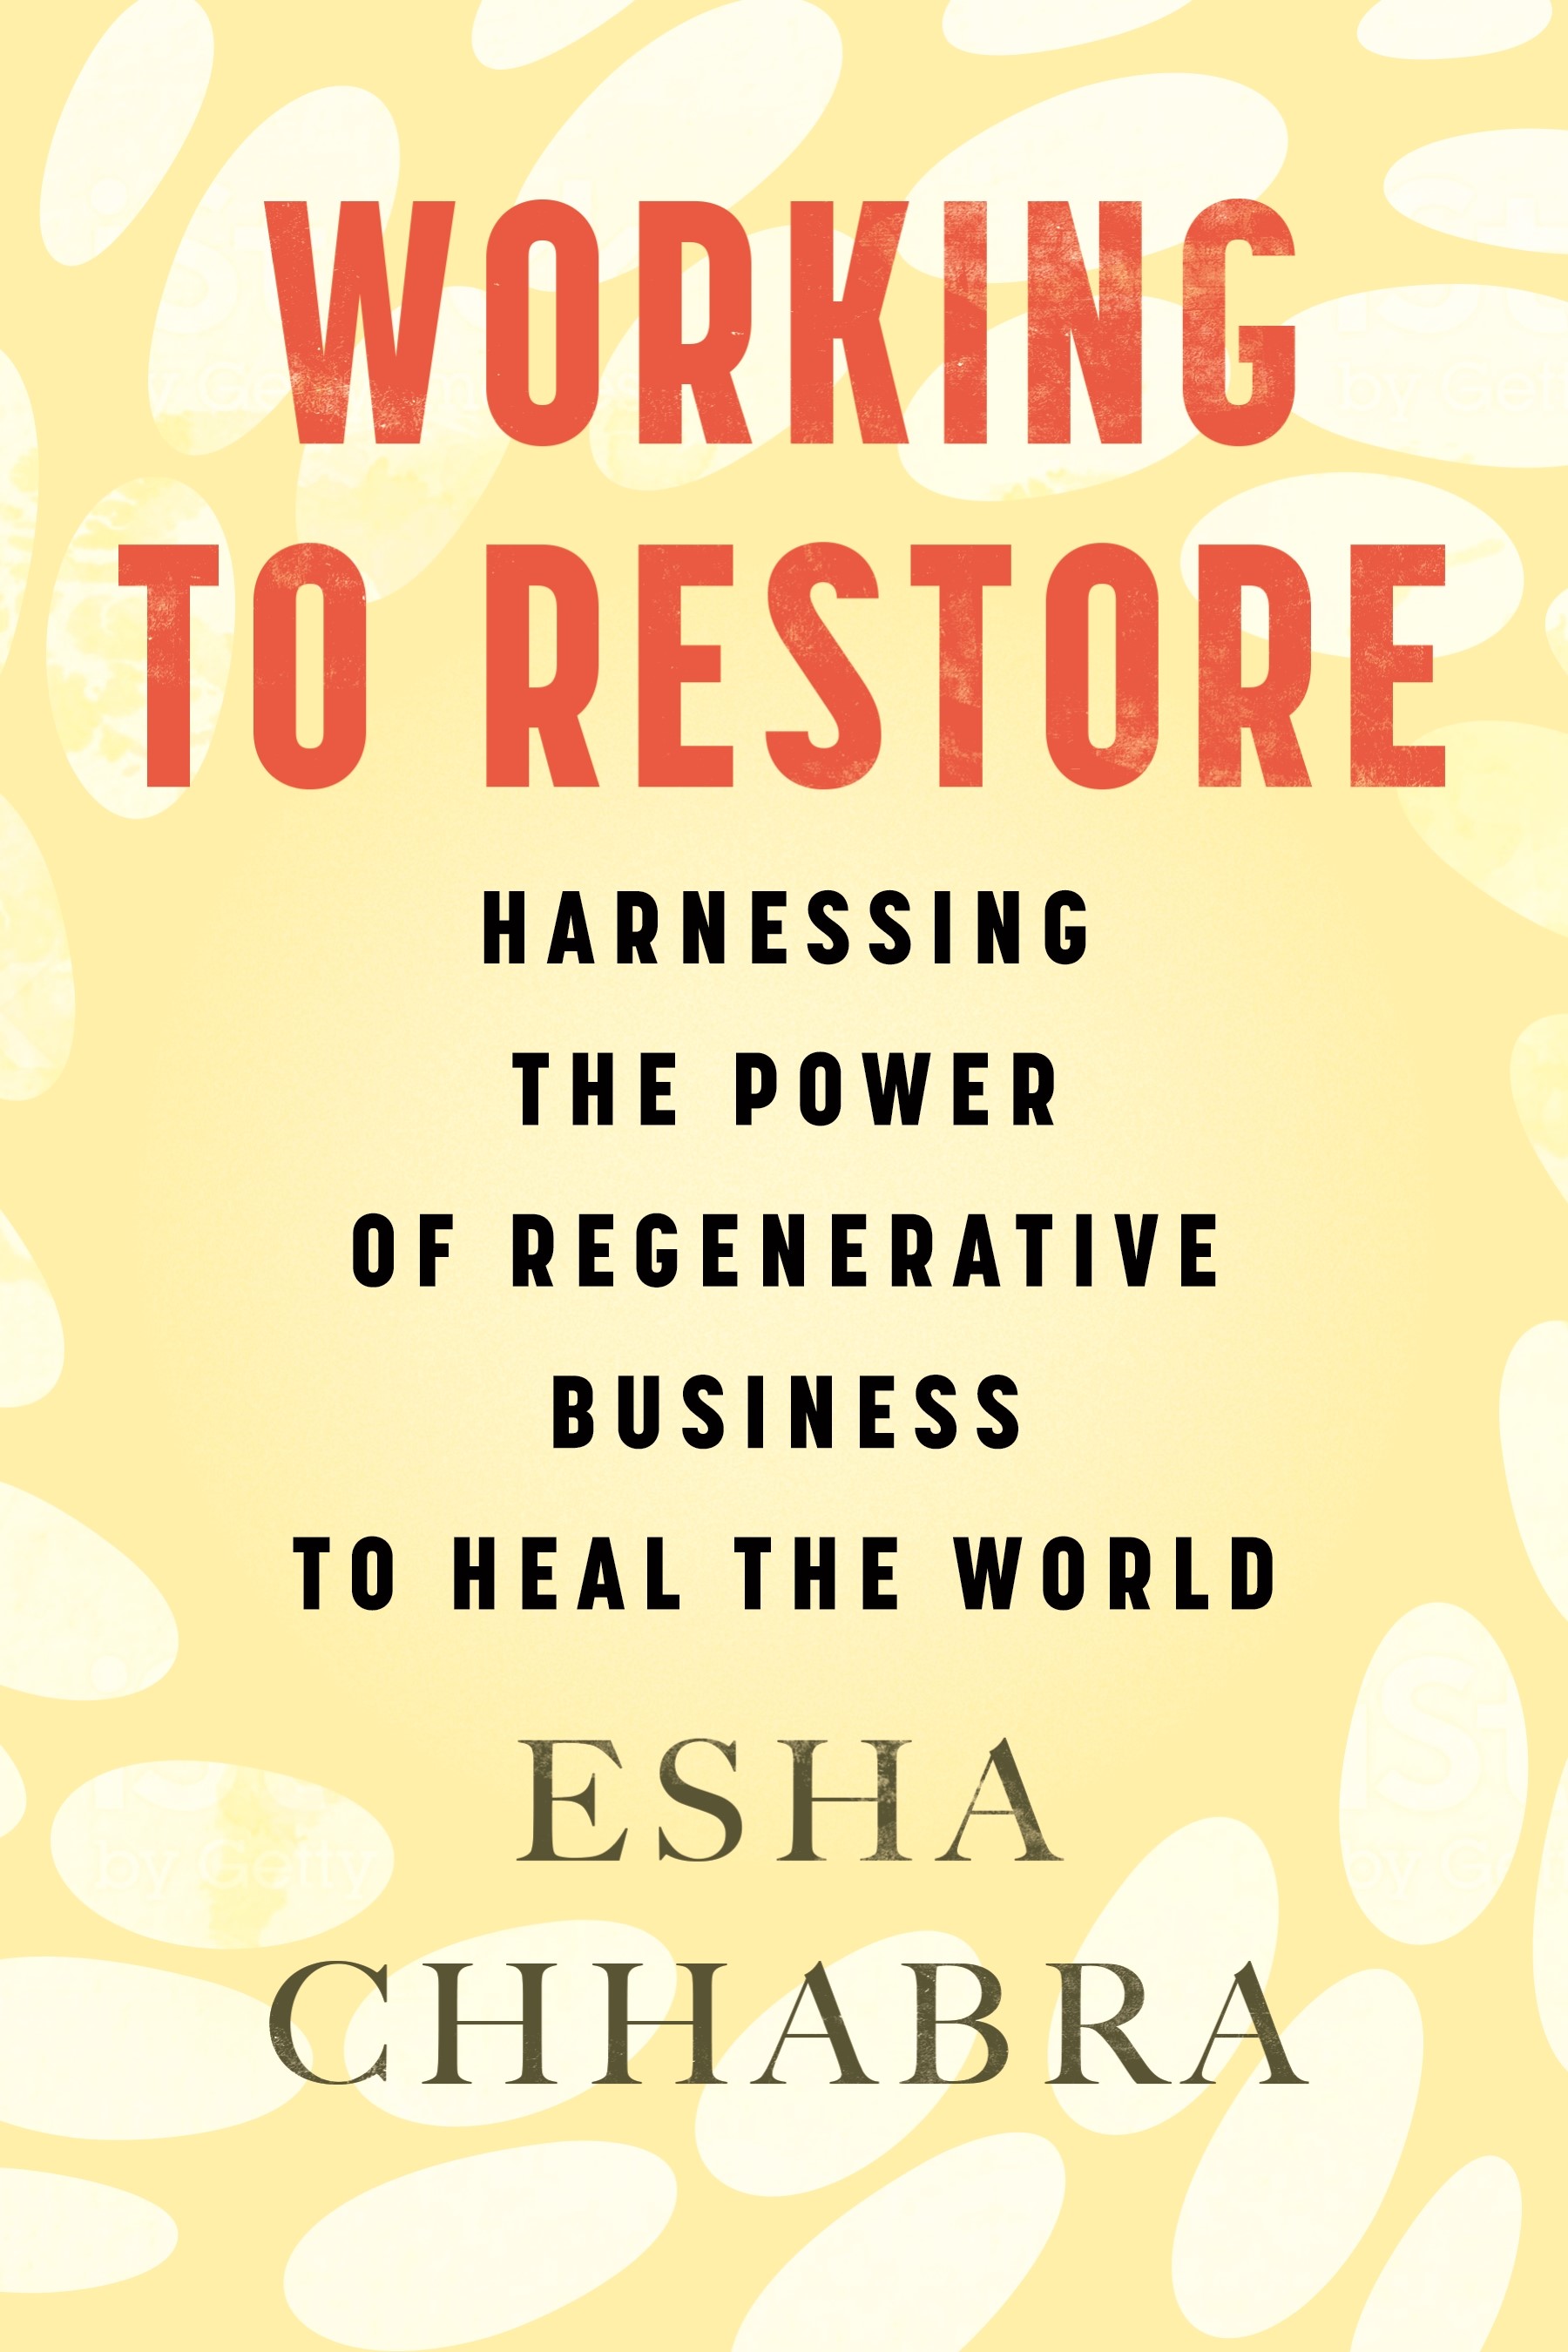  Working to Restore: Harnessing the Power of Regenerative Business to Heal the World